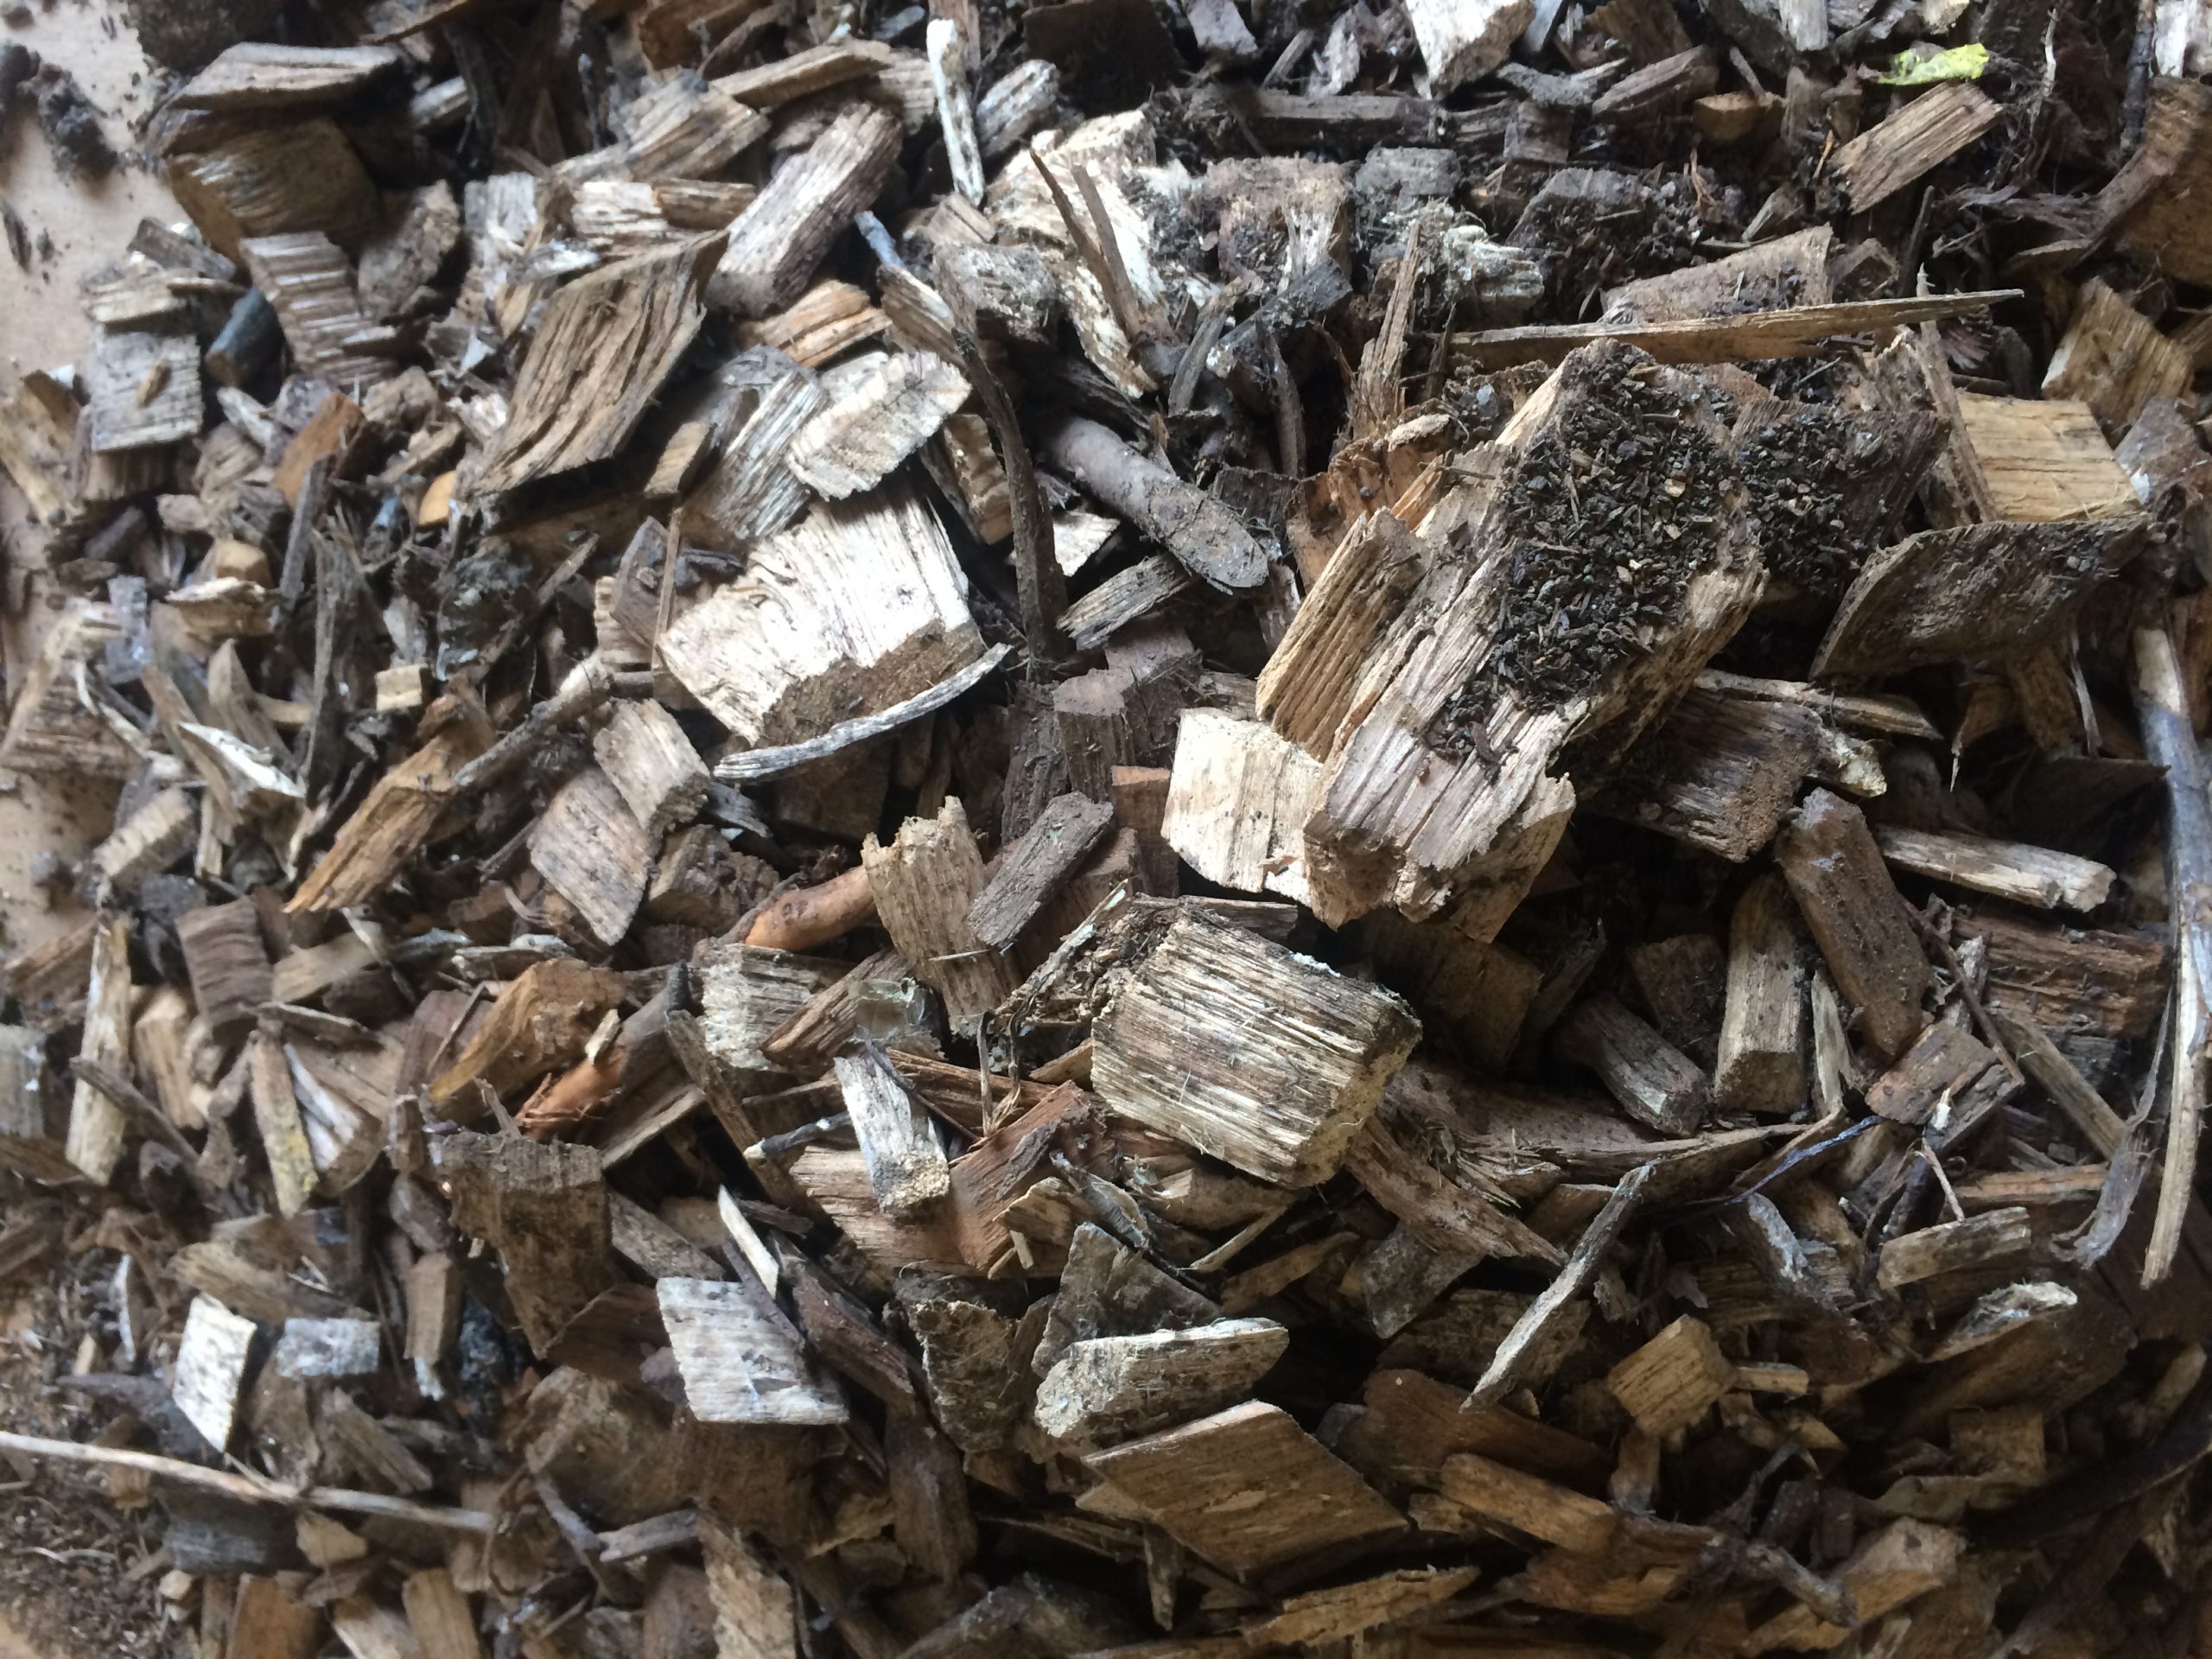 The environmentally friendly biodegradable core of the Silt Saver Chip Wattle is made up of kiln dried wood chips such as those pictured here.